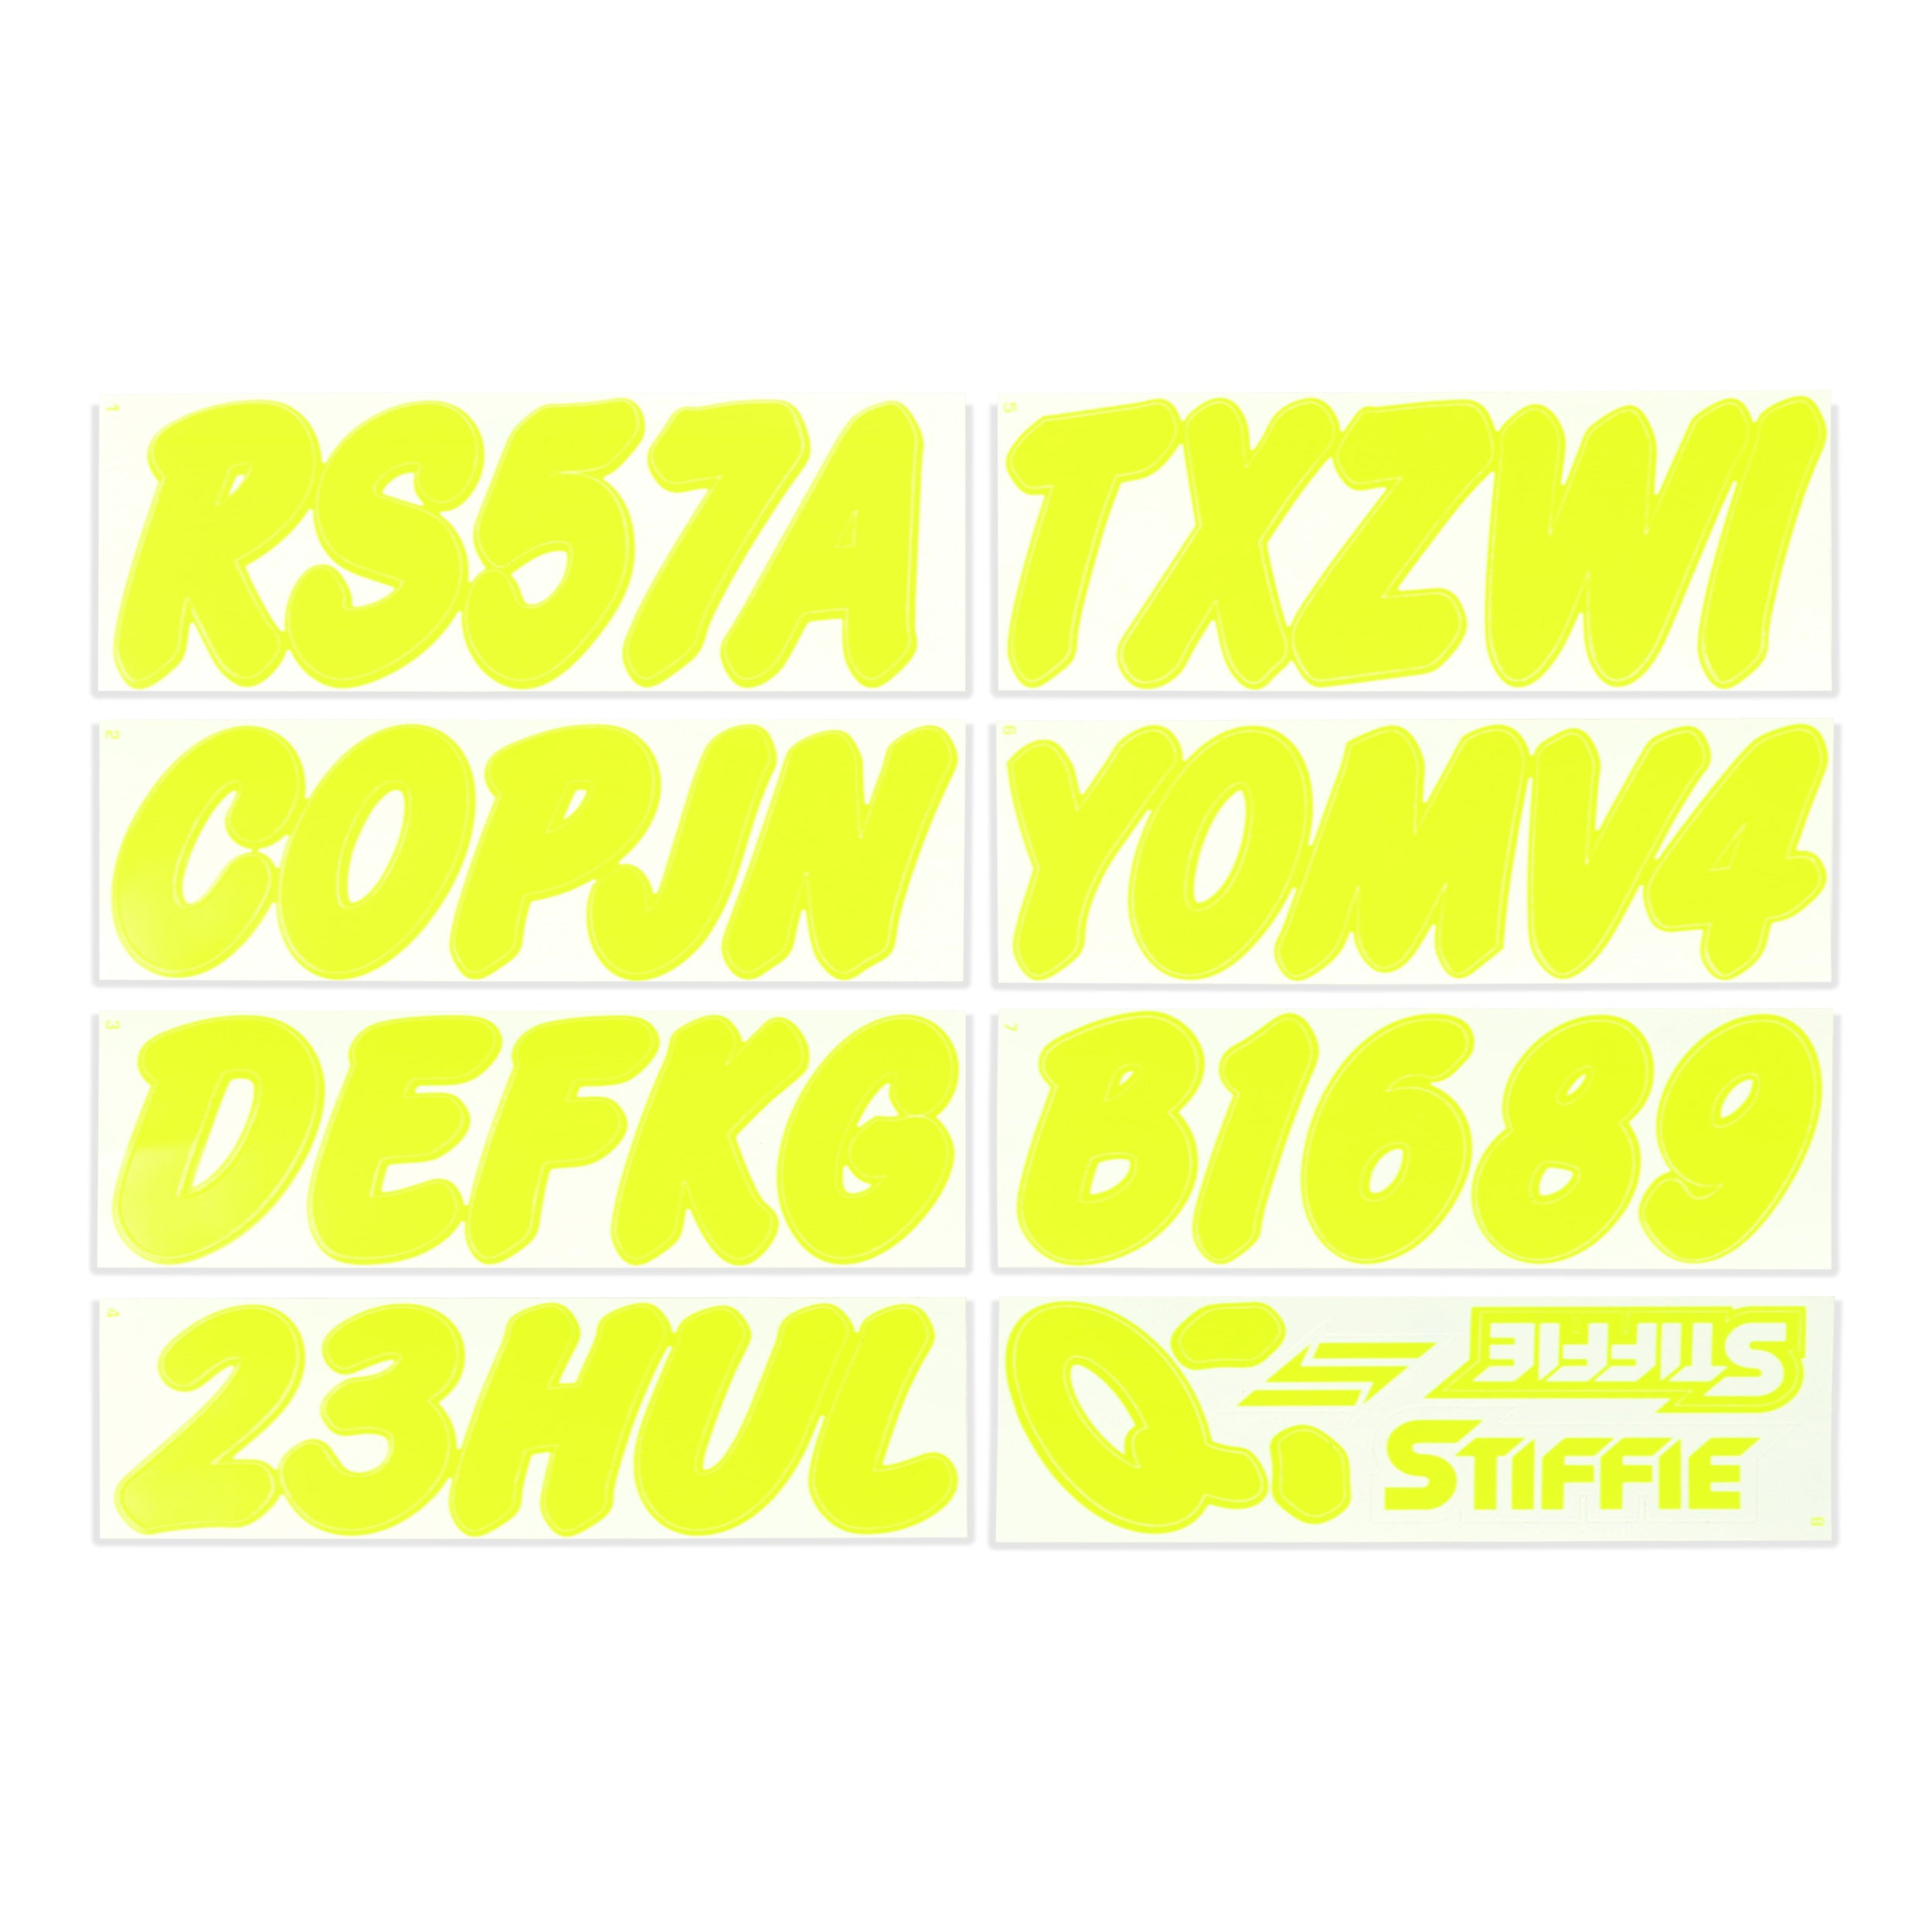 Stiffie Whip-One Day Glow Yellow Super Sticky 3" Alpha Numeric Registration Identification Numbers Stickers Decals for Sea-Doo Spark, Inflatable Boats, Ribs, Hypalon/PVC, PWC and Boats